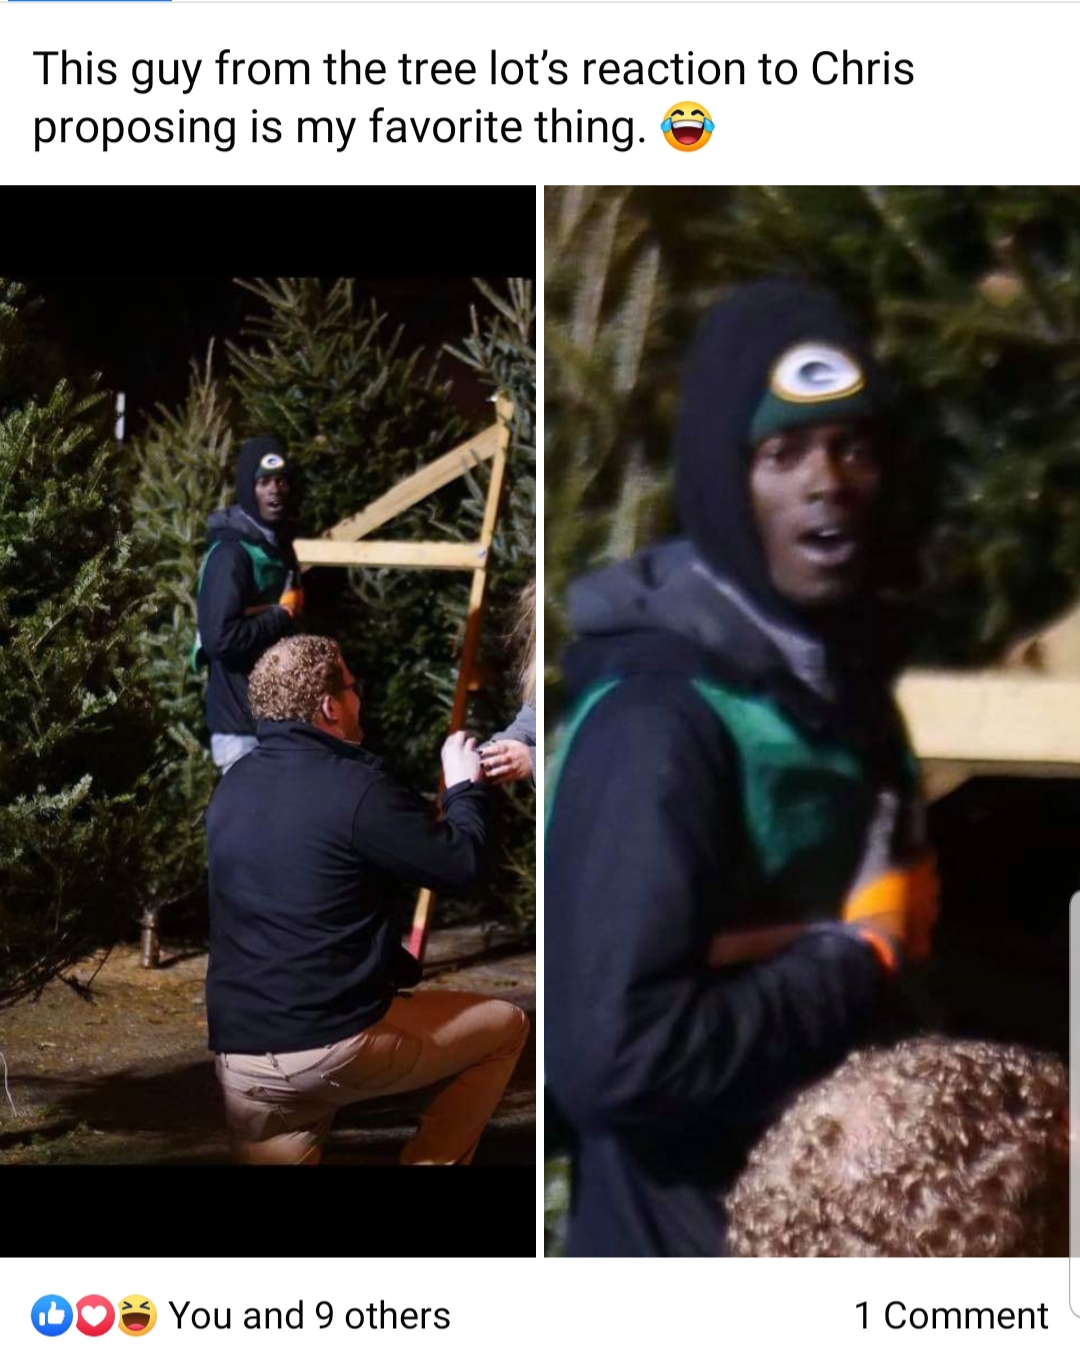 tree - This guy from the tree lot's reaction to Chris proposing is my favorite thing. 00 You and 9 others 1 Comment